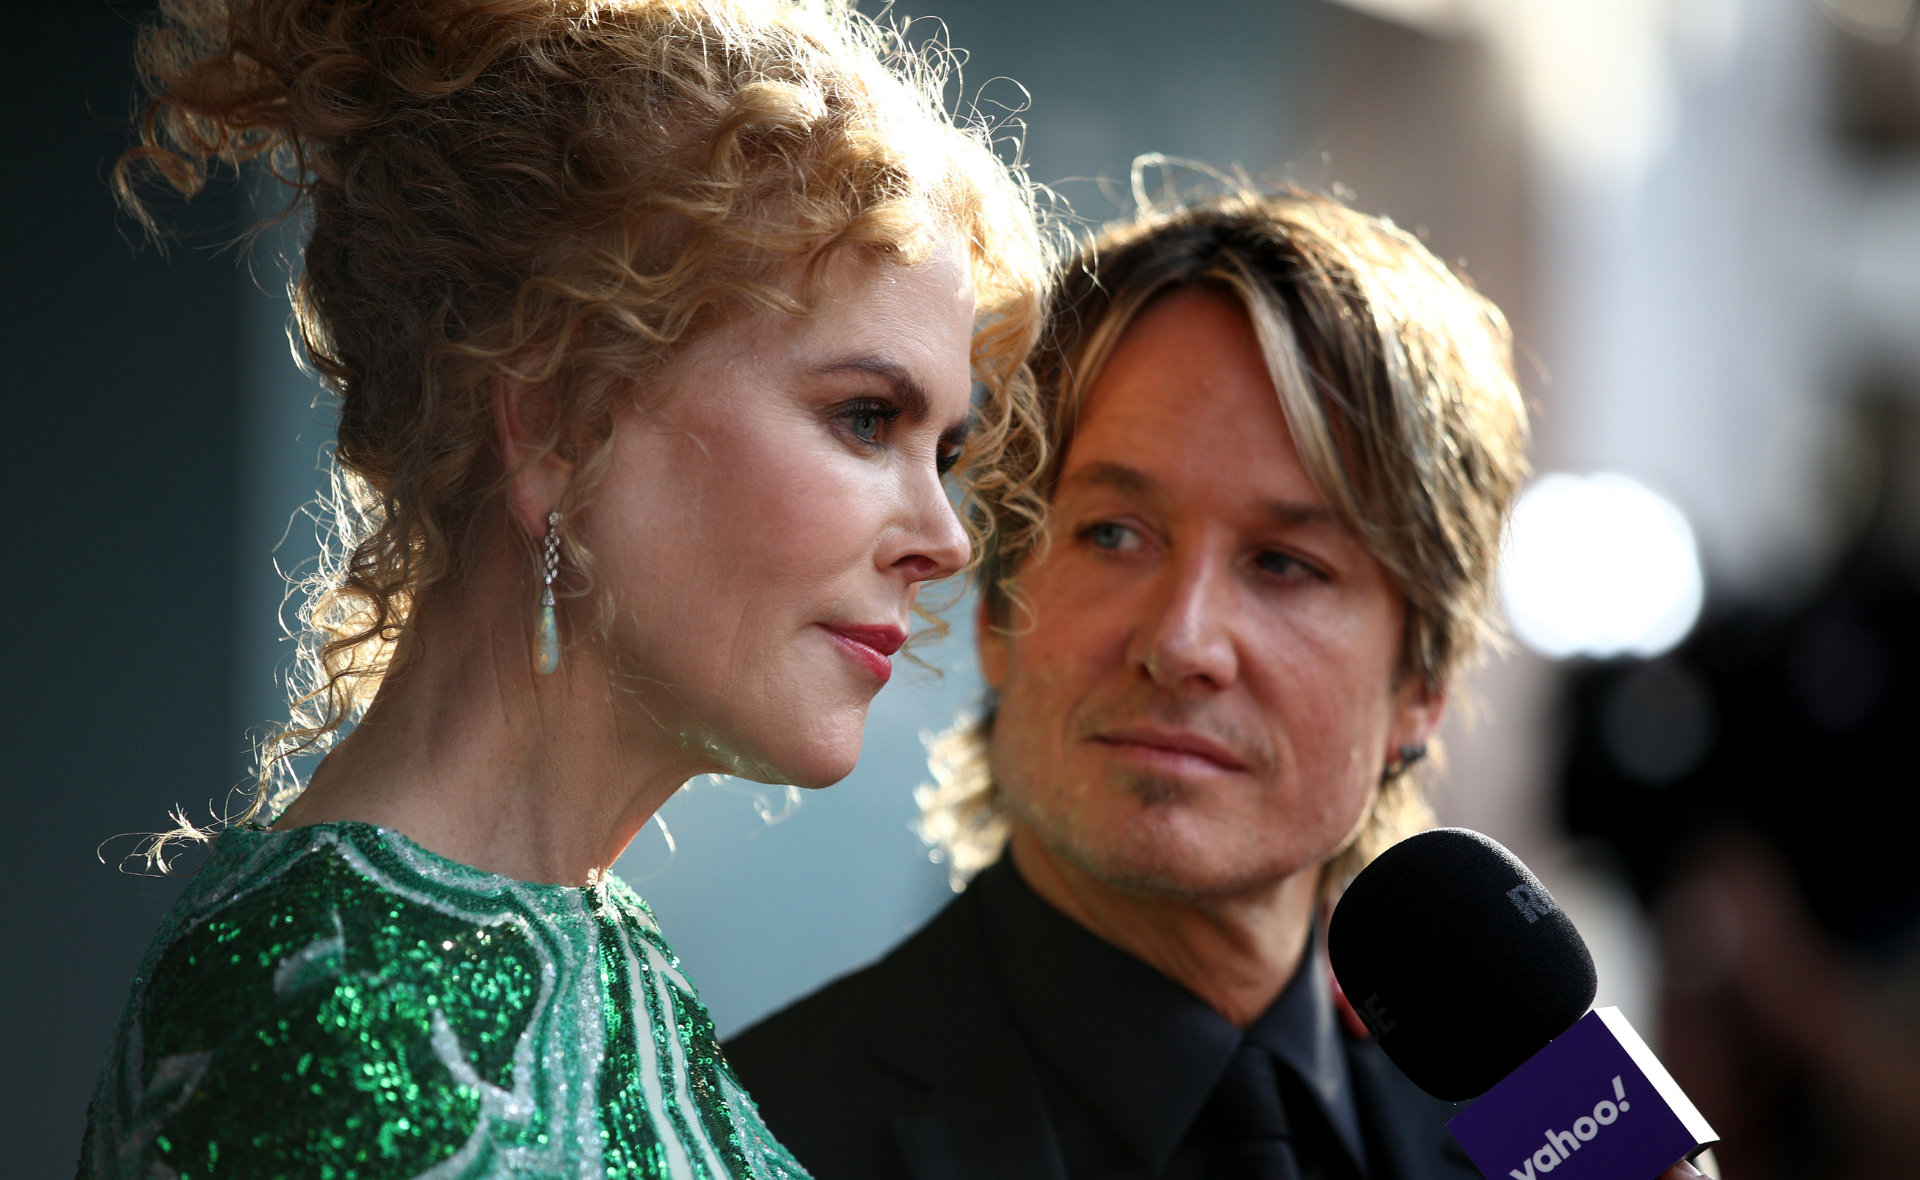 Safety concerns for Nicole Kidman rise as she becomes targeted by stalkers